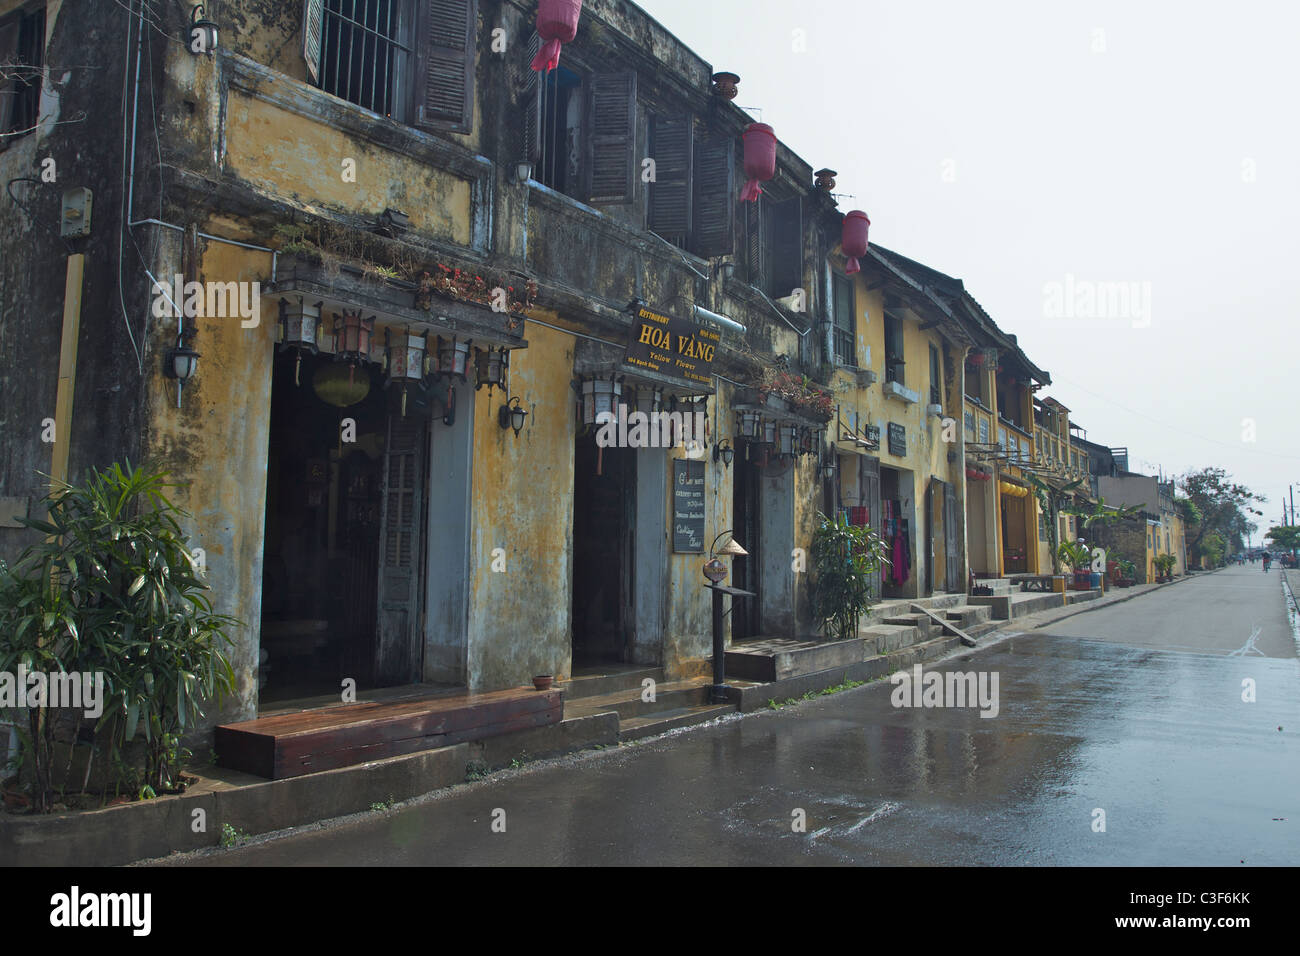 Deserted street in Hoi An, Vietnam. The street has recently been washed. Stock Photo